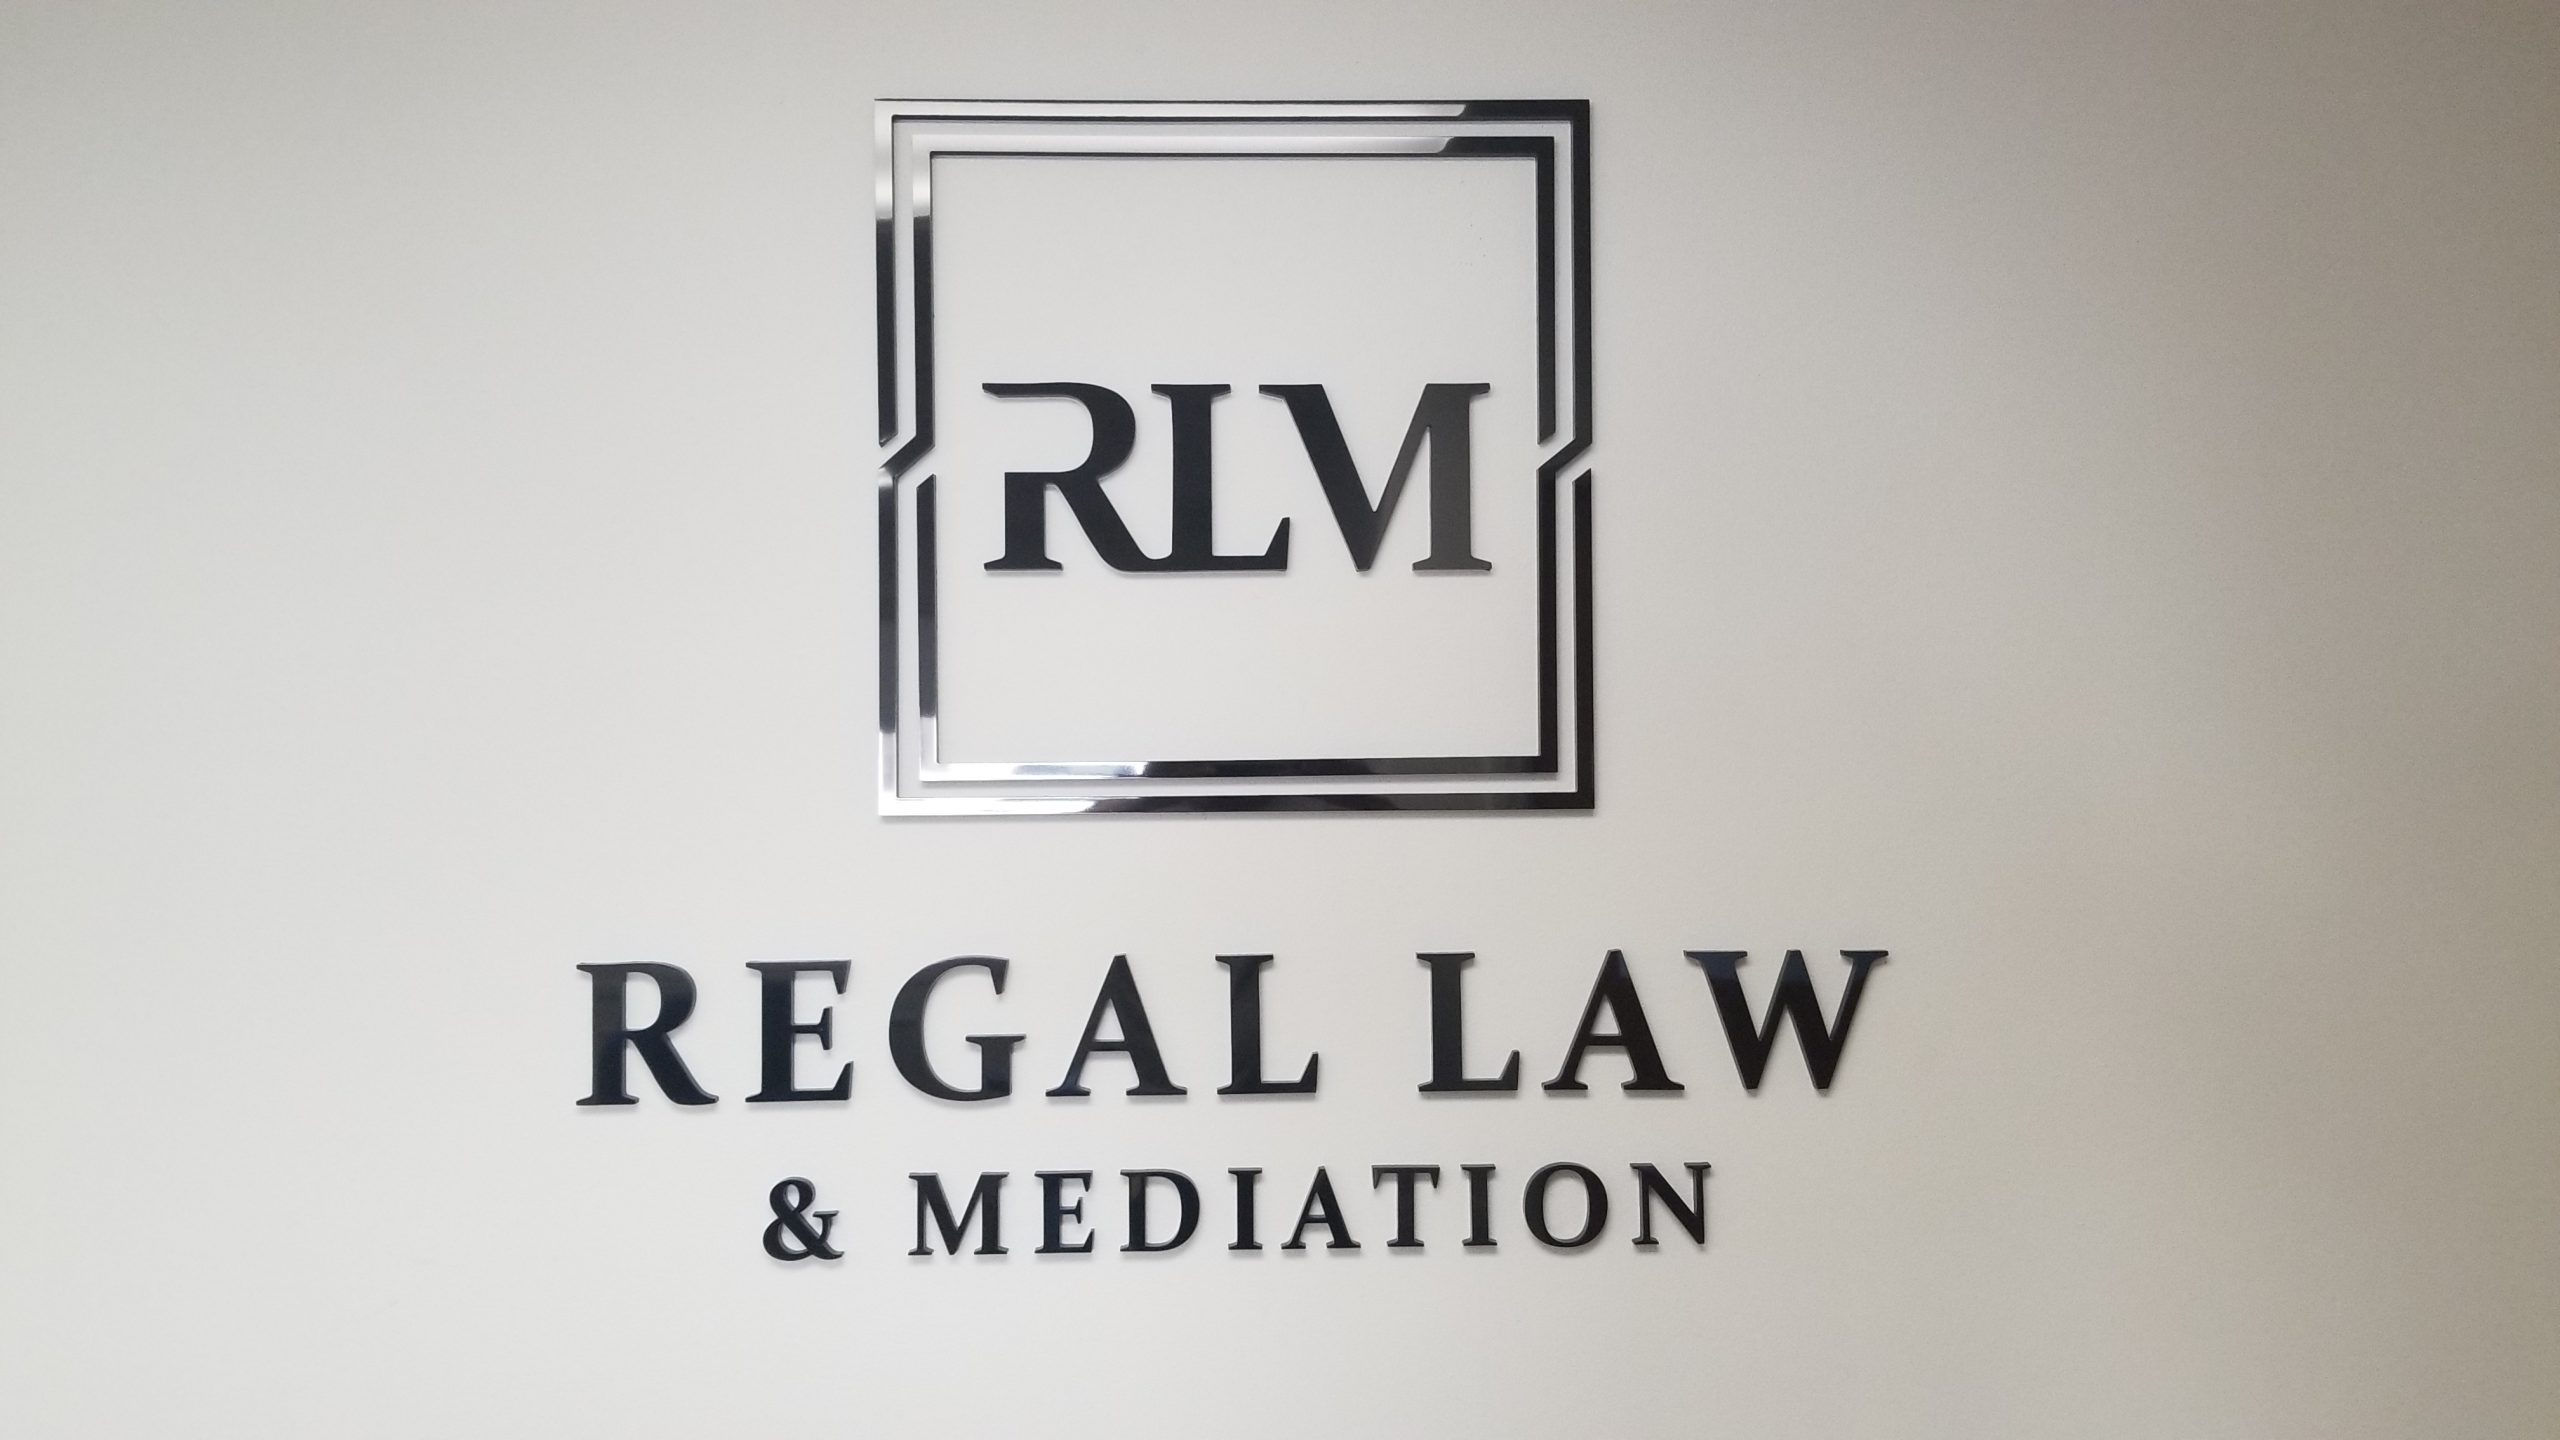 This time the focus is on the laser-cut acrylic office lobby sign for Regal Law. Now the Torrance legal firm has a stunning centerpiece.